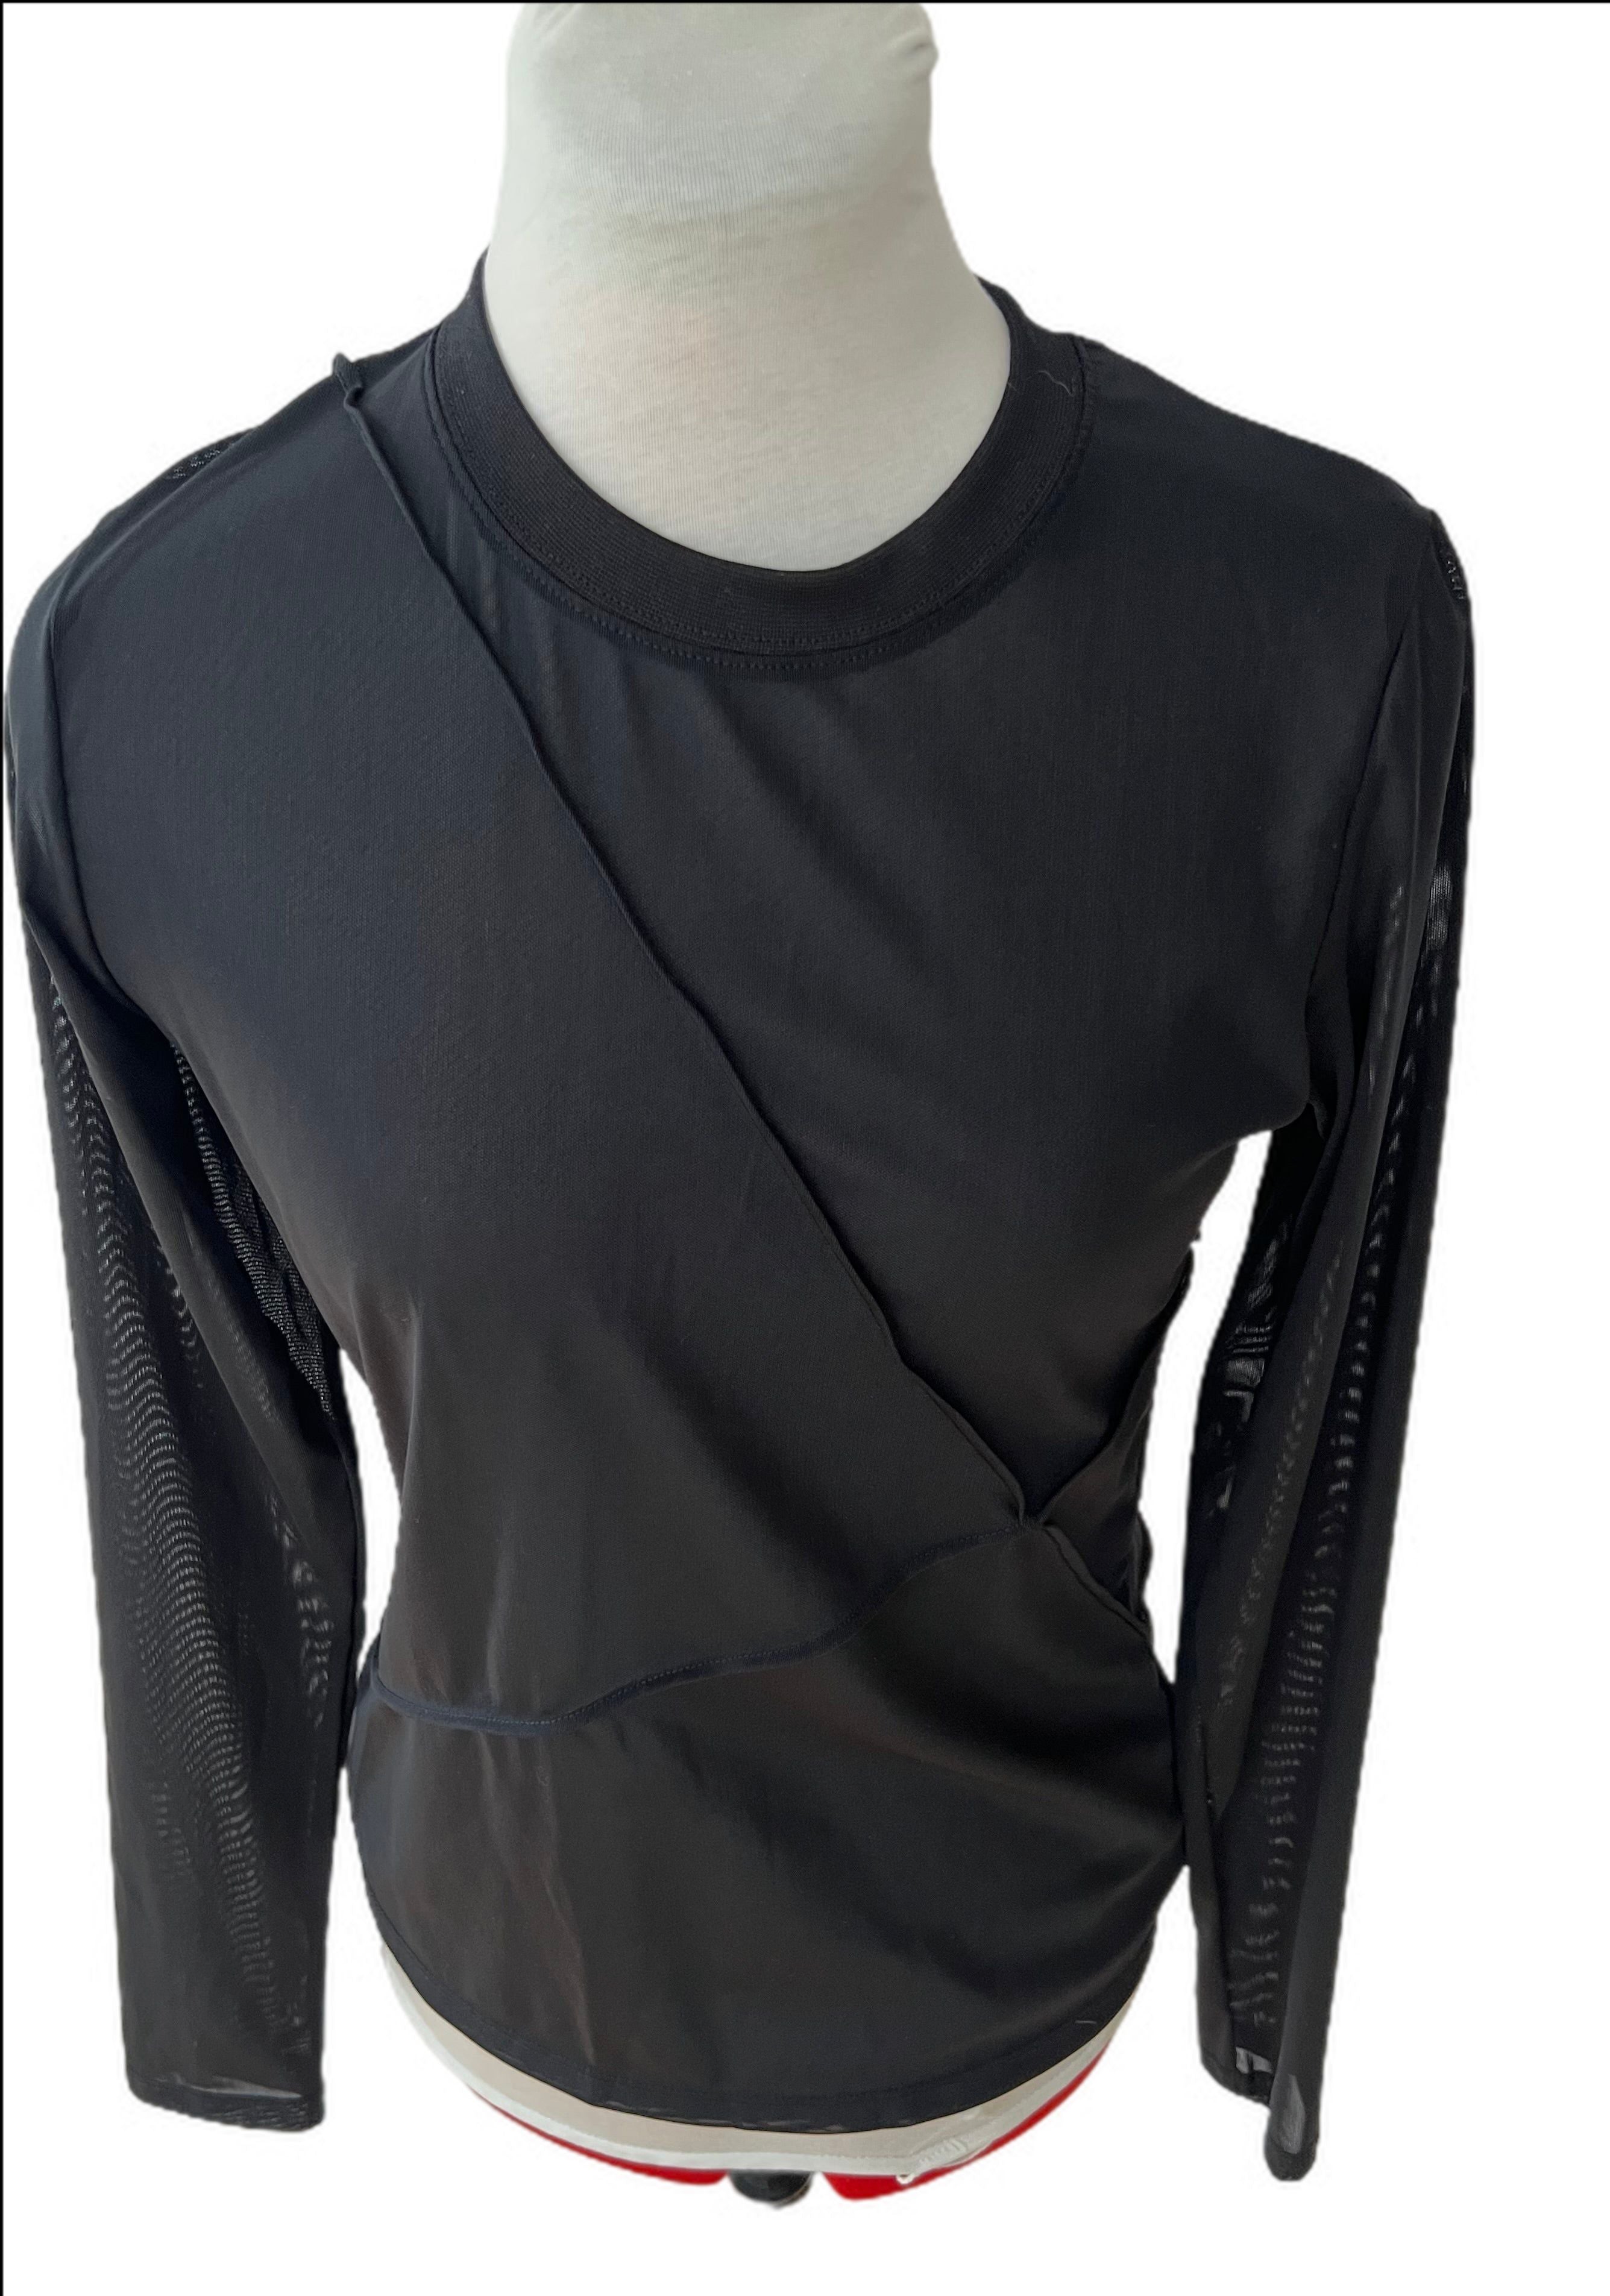 H&M Sheer top with seam detail